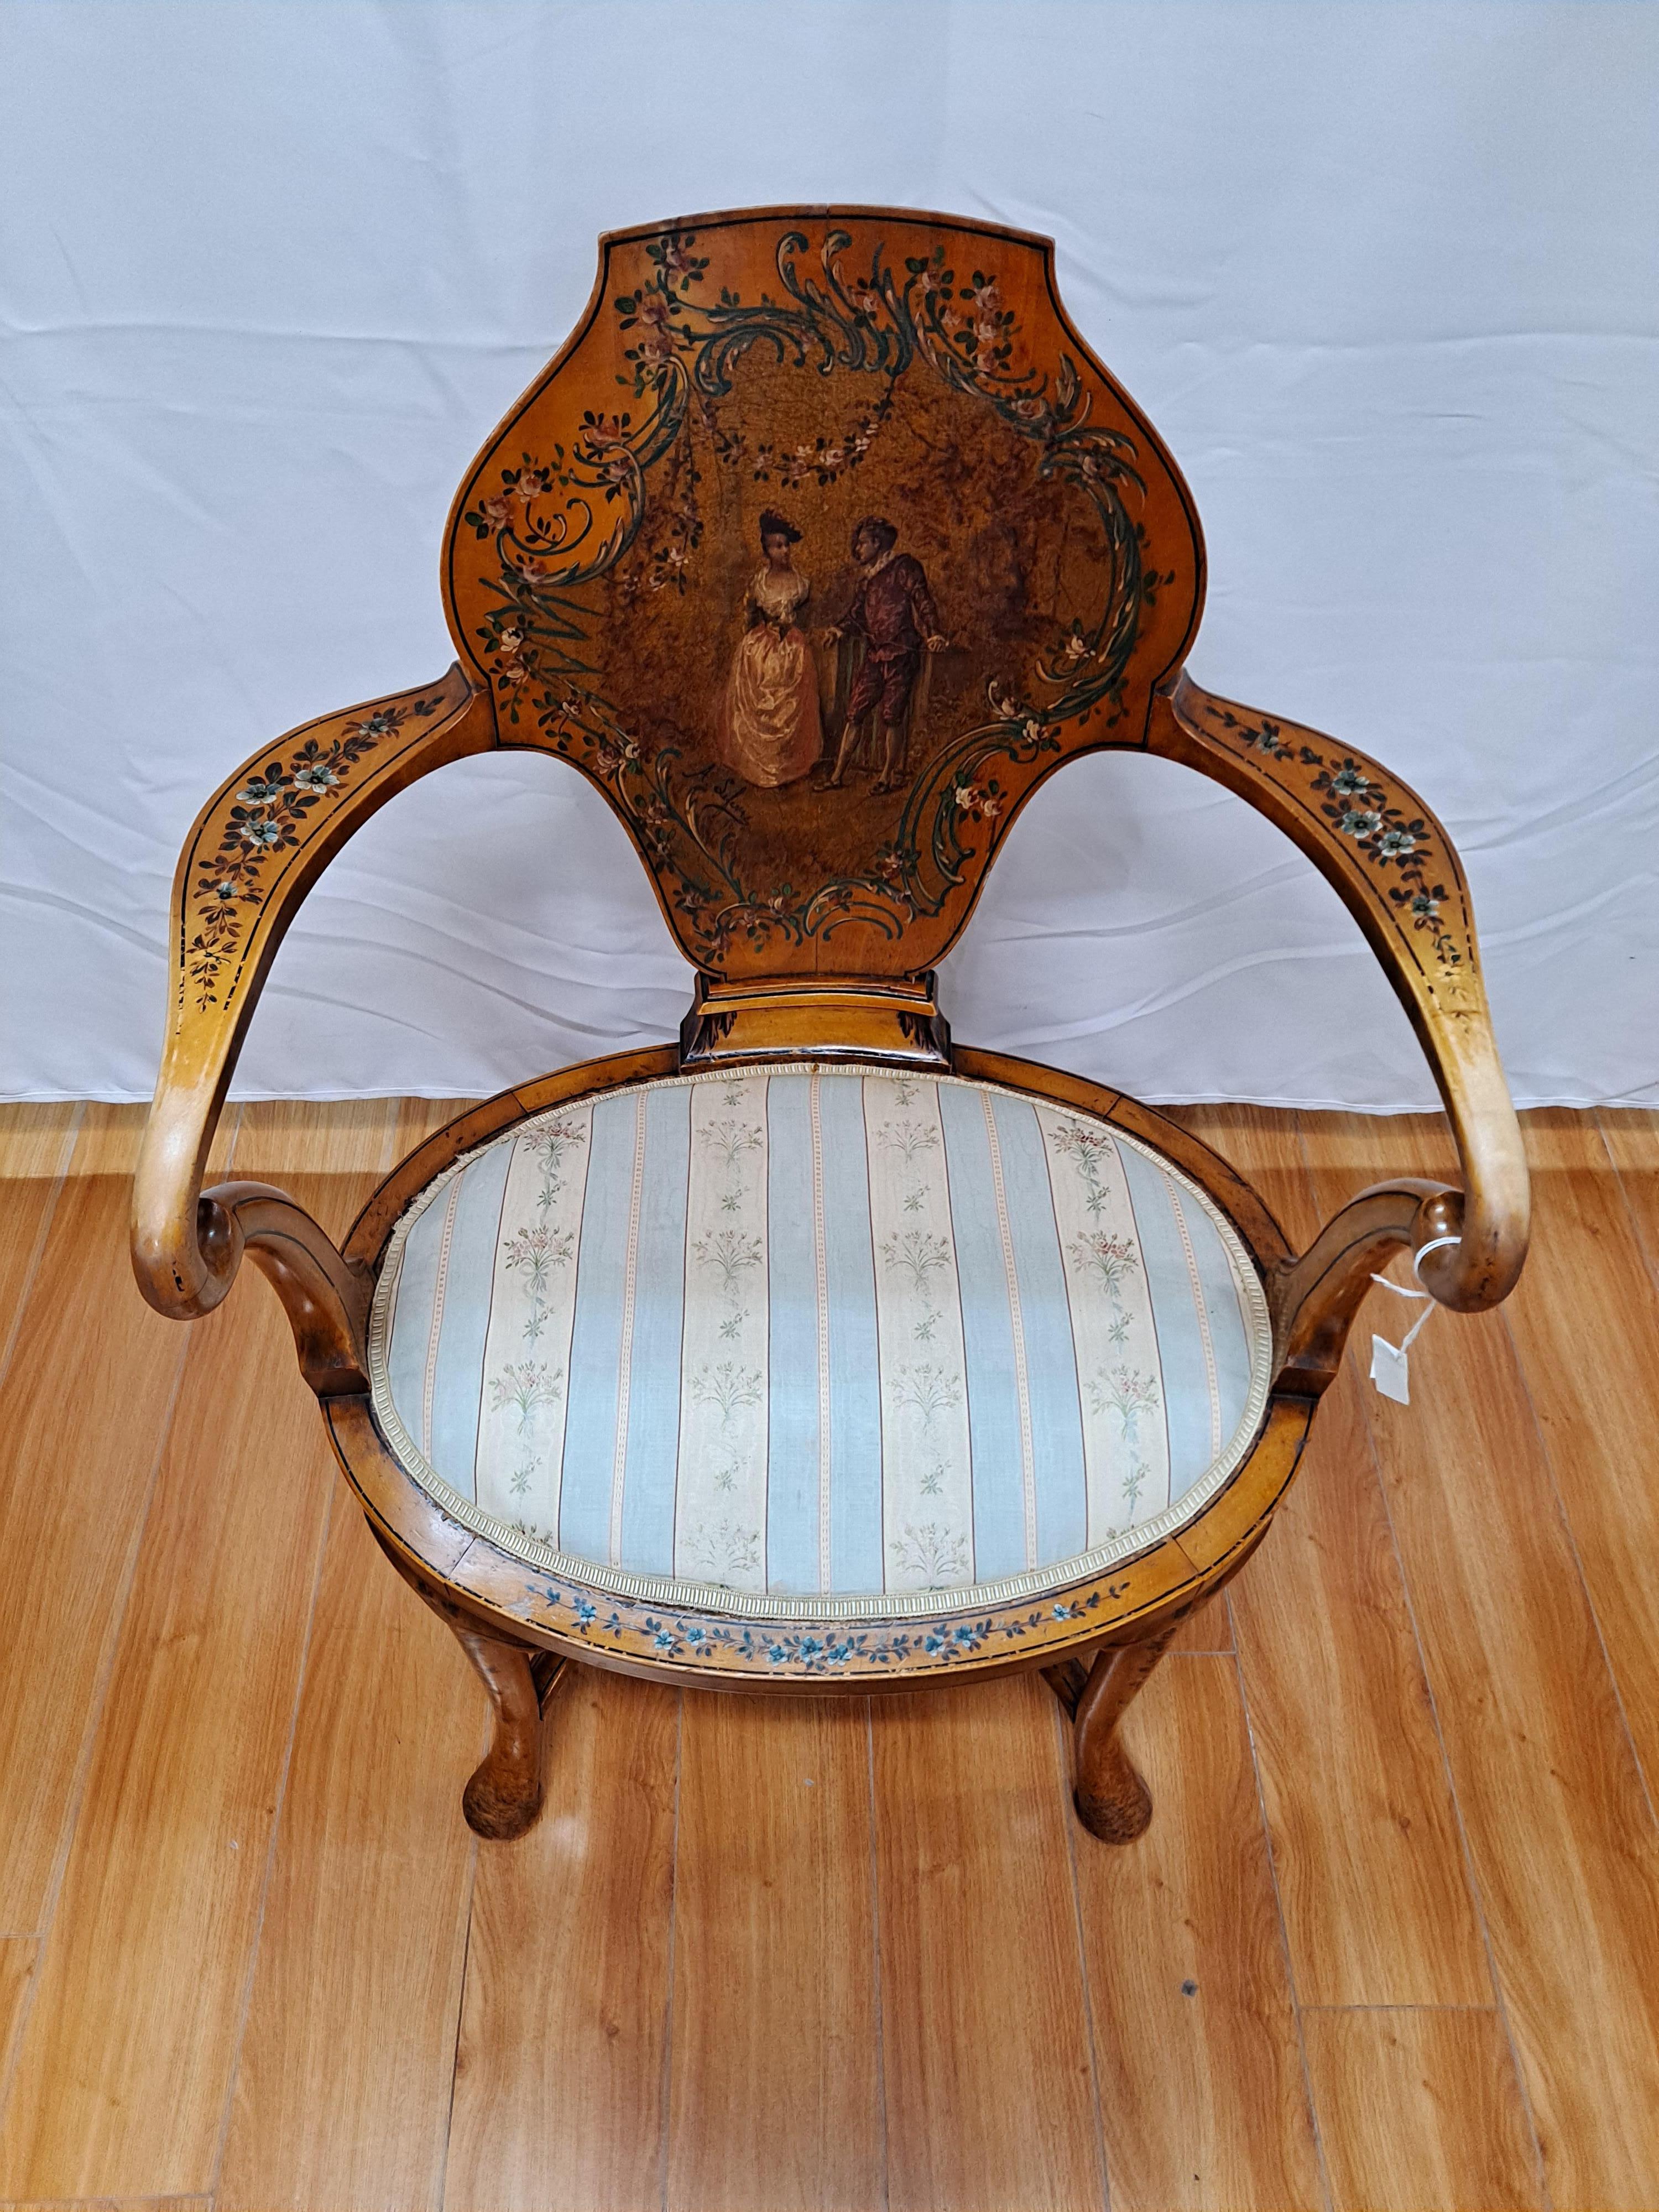 Verni Martin style hand painted armchair w/shaped open arms, shield form back, and cabriole legs with stretchers.

Painted floral and court scene 

Signed A. Lefevre 

25